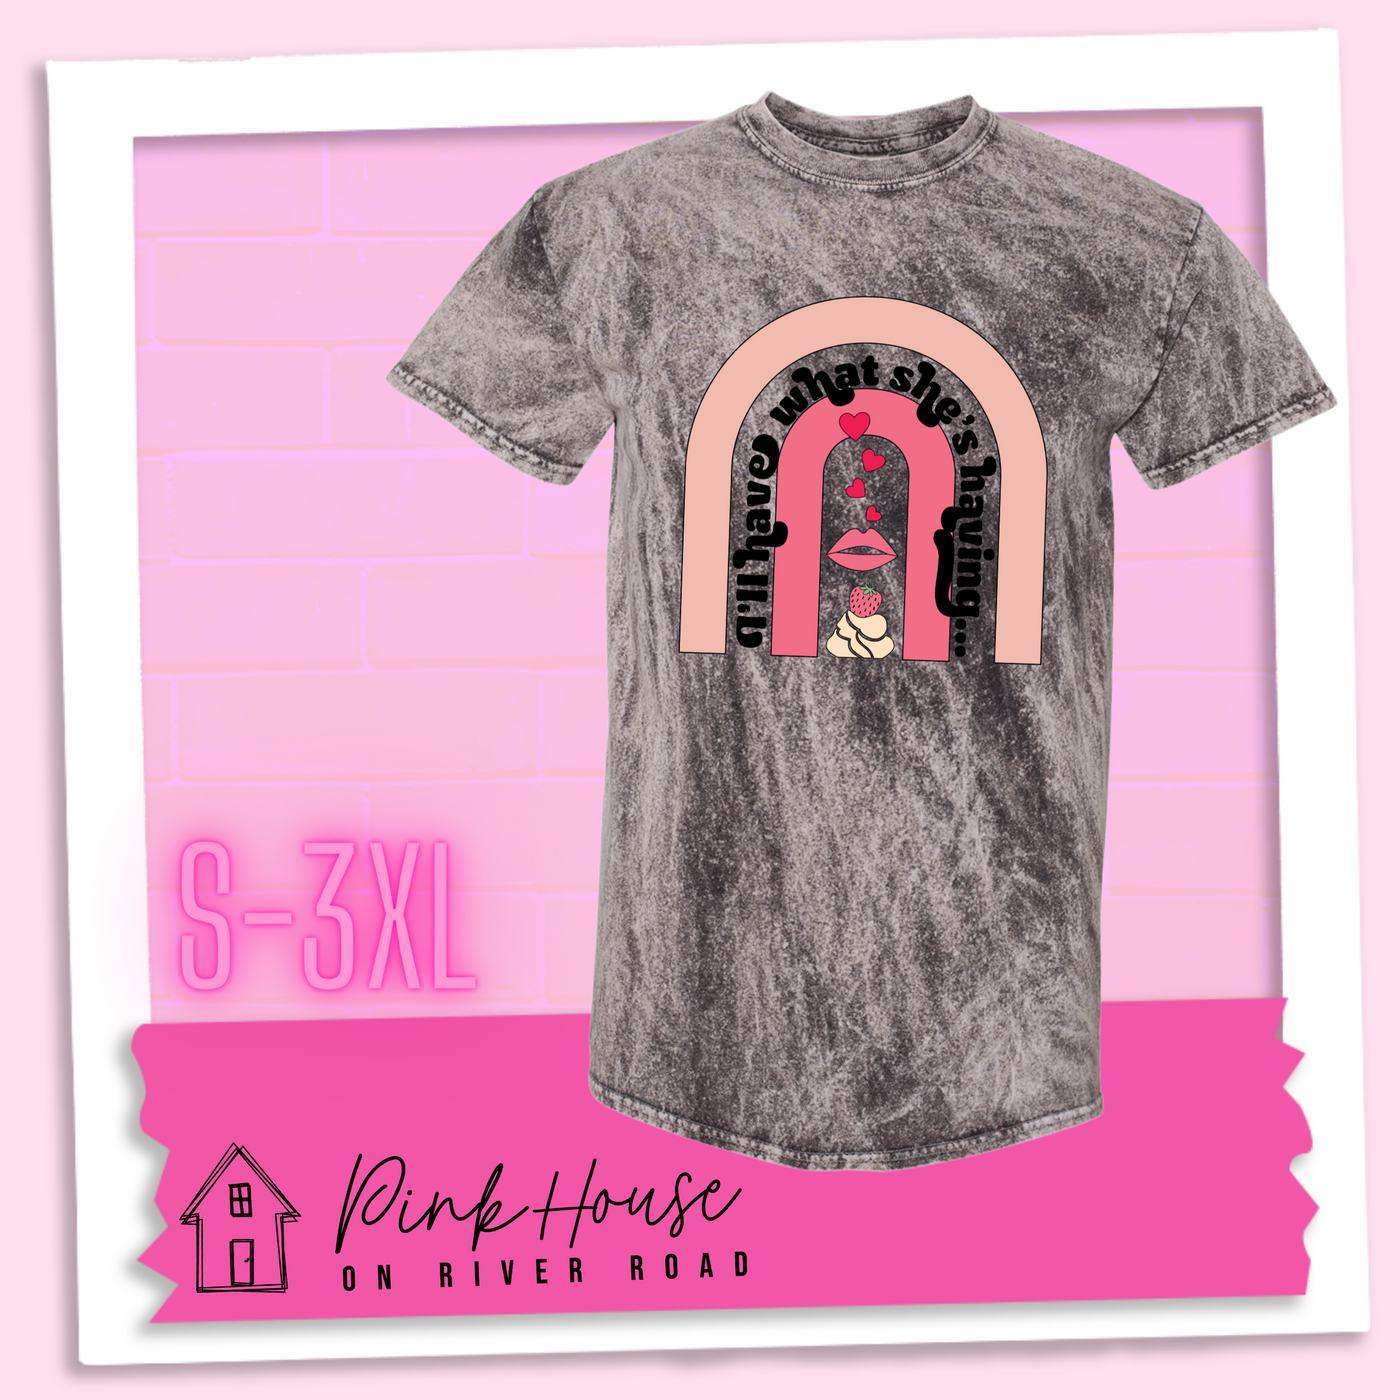 Charcoal Mineral Wash tee with a graphic of a strawberry dessert and a set of lips with hearts, there is a pink arch going over the art. There is a retro font arched over the pink art that says "I'll have what she's having..." in black with another arch above that in light pink.